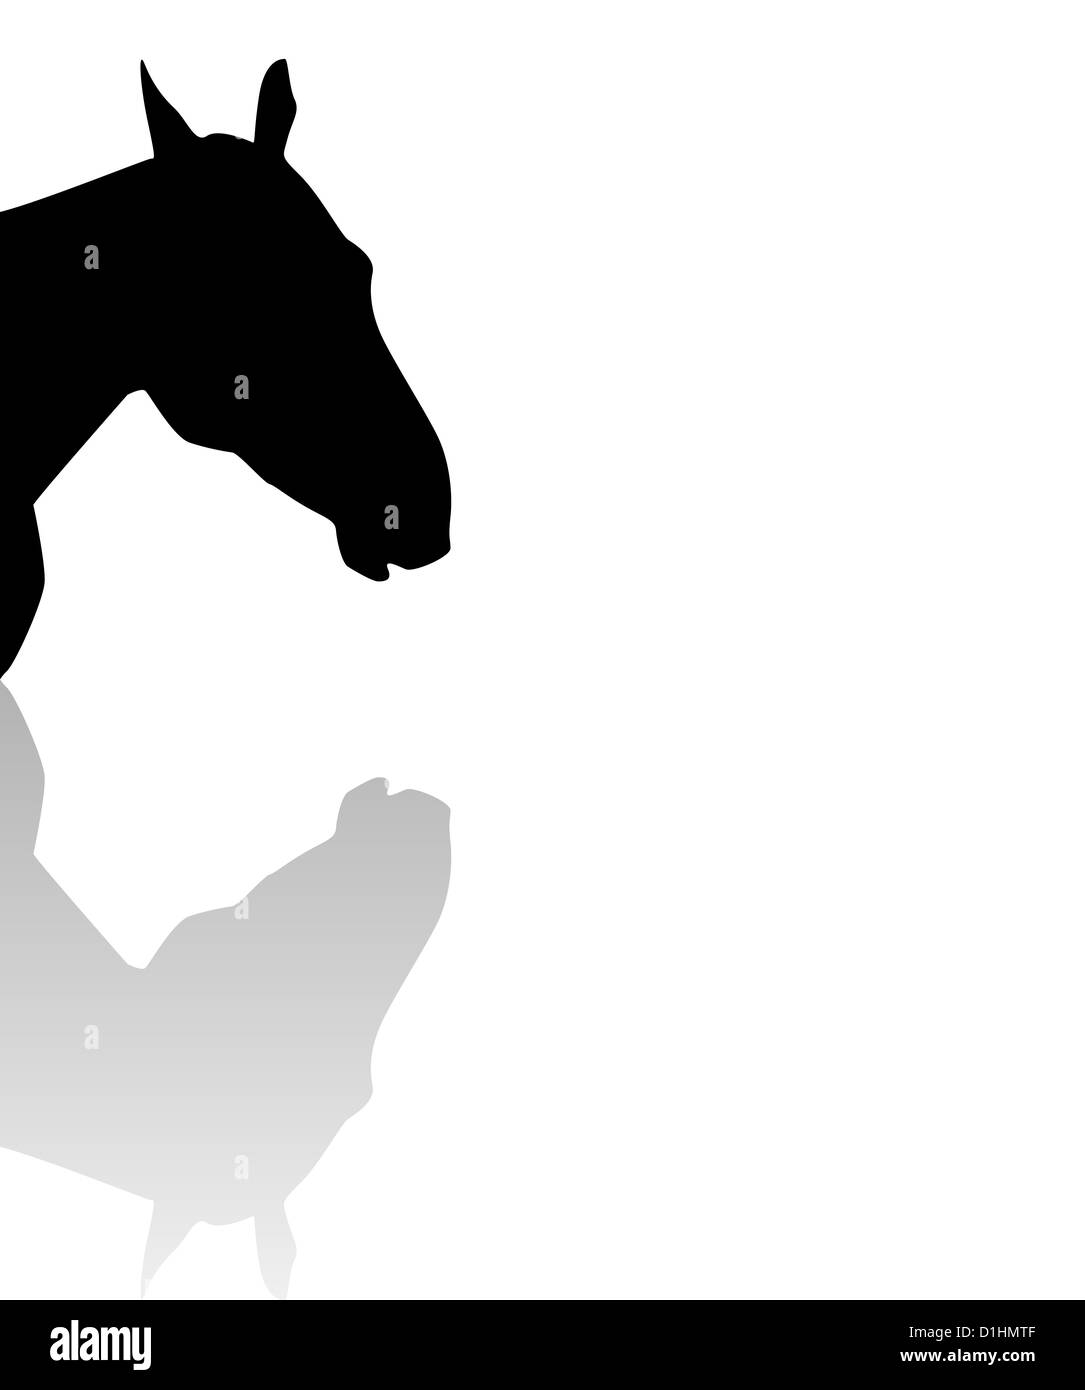 sillhouette of a horse head with reflection Stock Photo